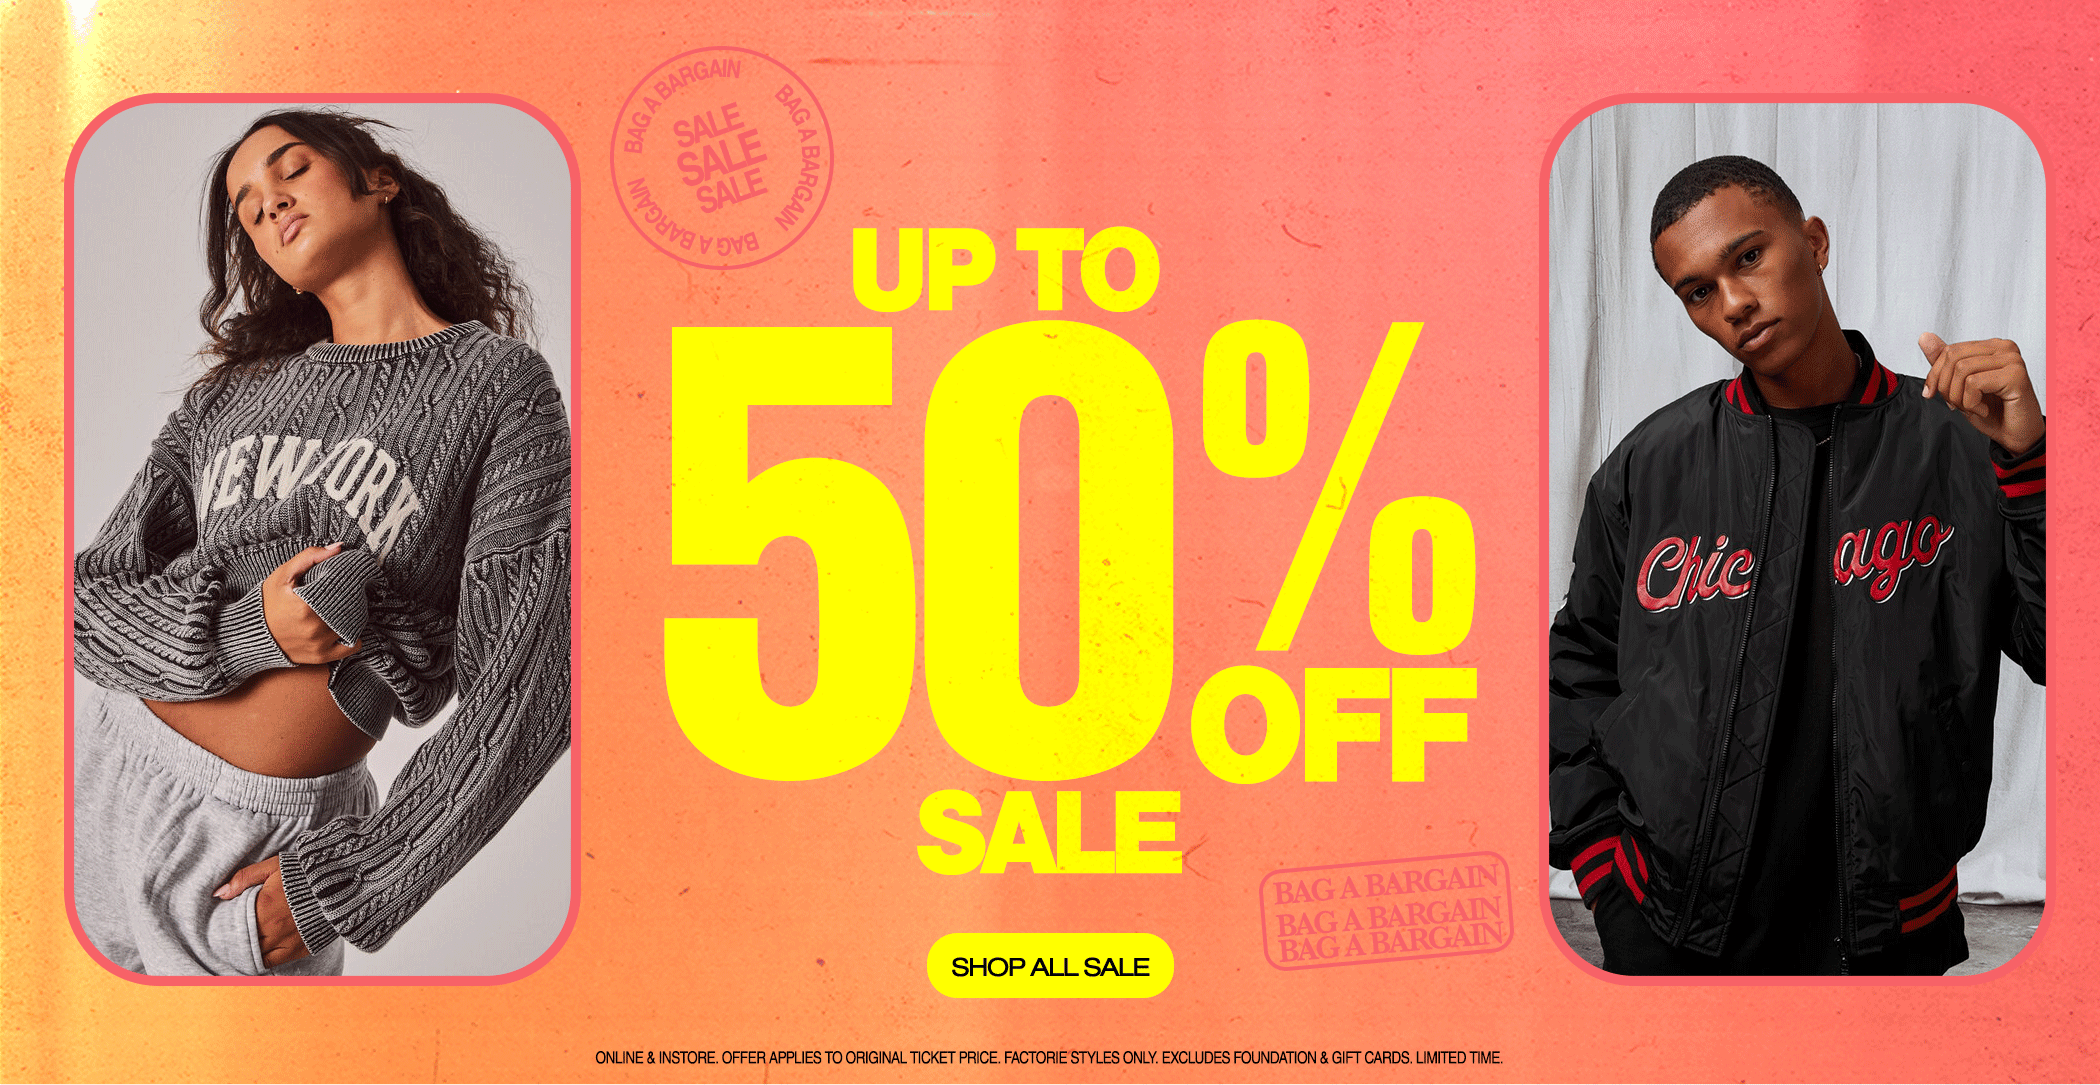 Up to 50% off Sale, bag a bargain!!